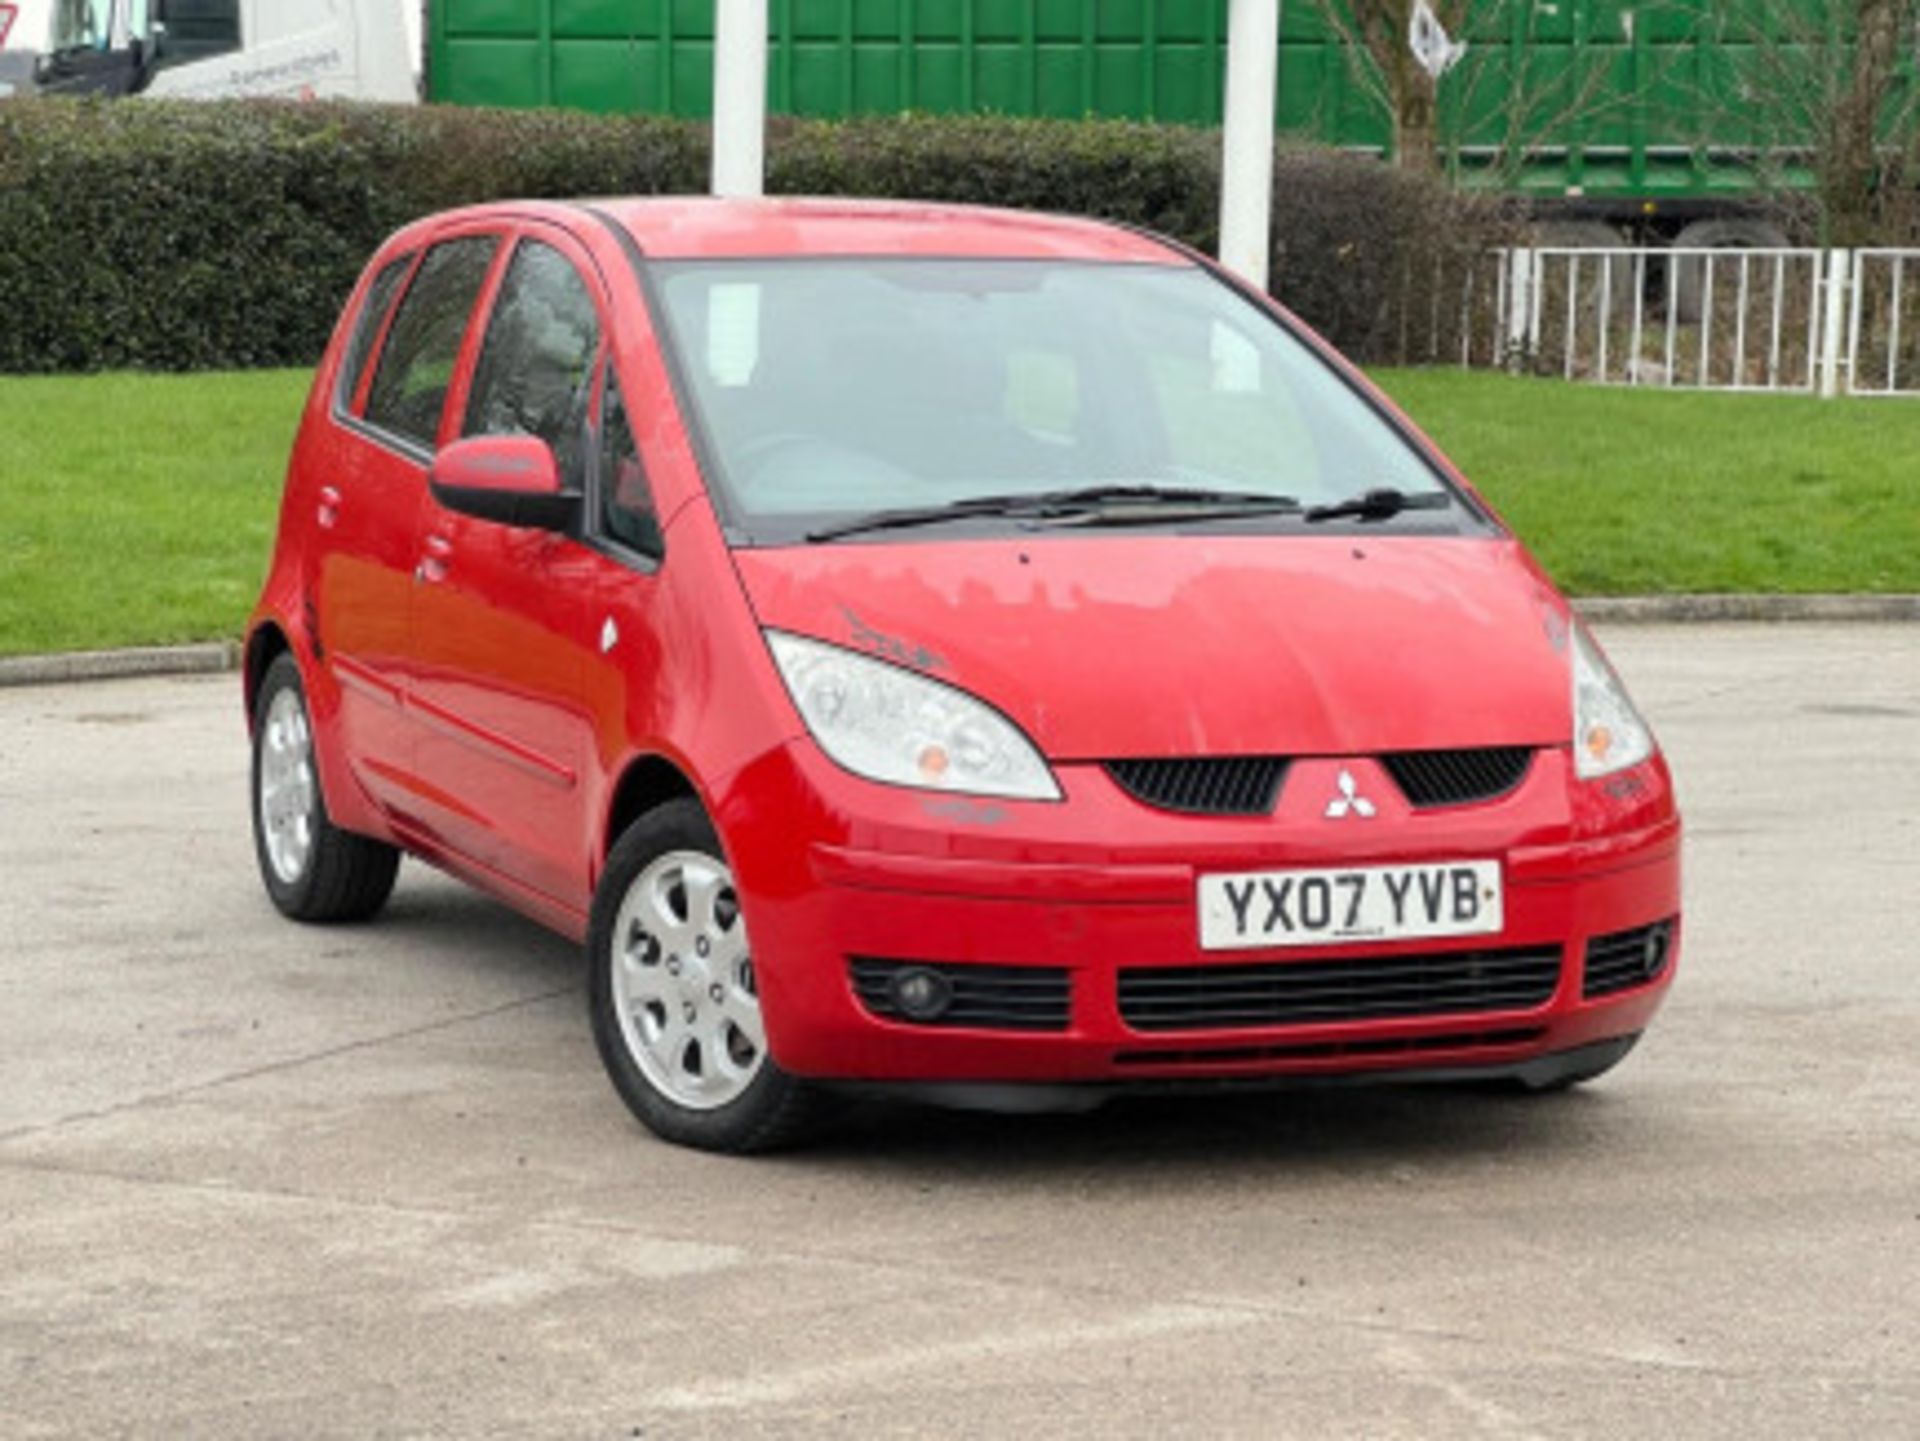 2007 MITSUBISHI COLT 1.5 DI-D DIESEL AUTOMATIC >>--NO VAT ON HAMMER--<< - Image 63 of 127